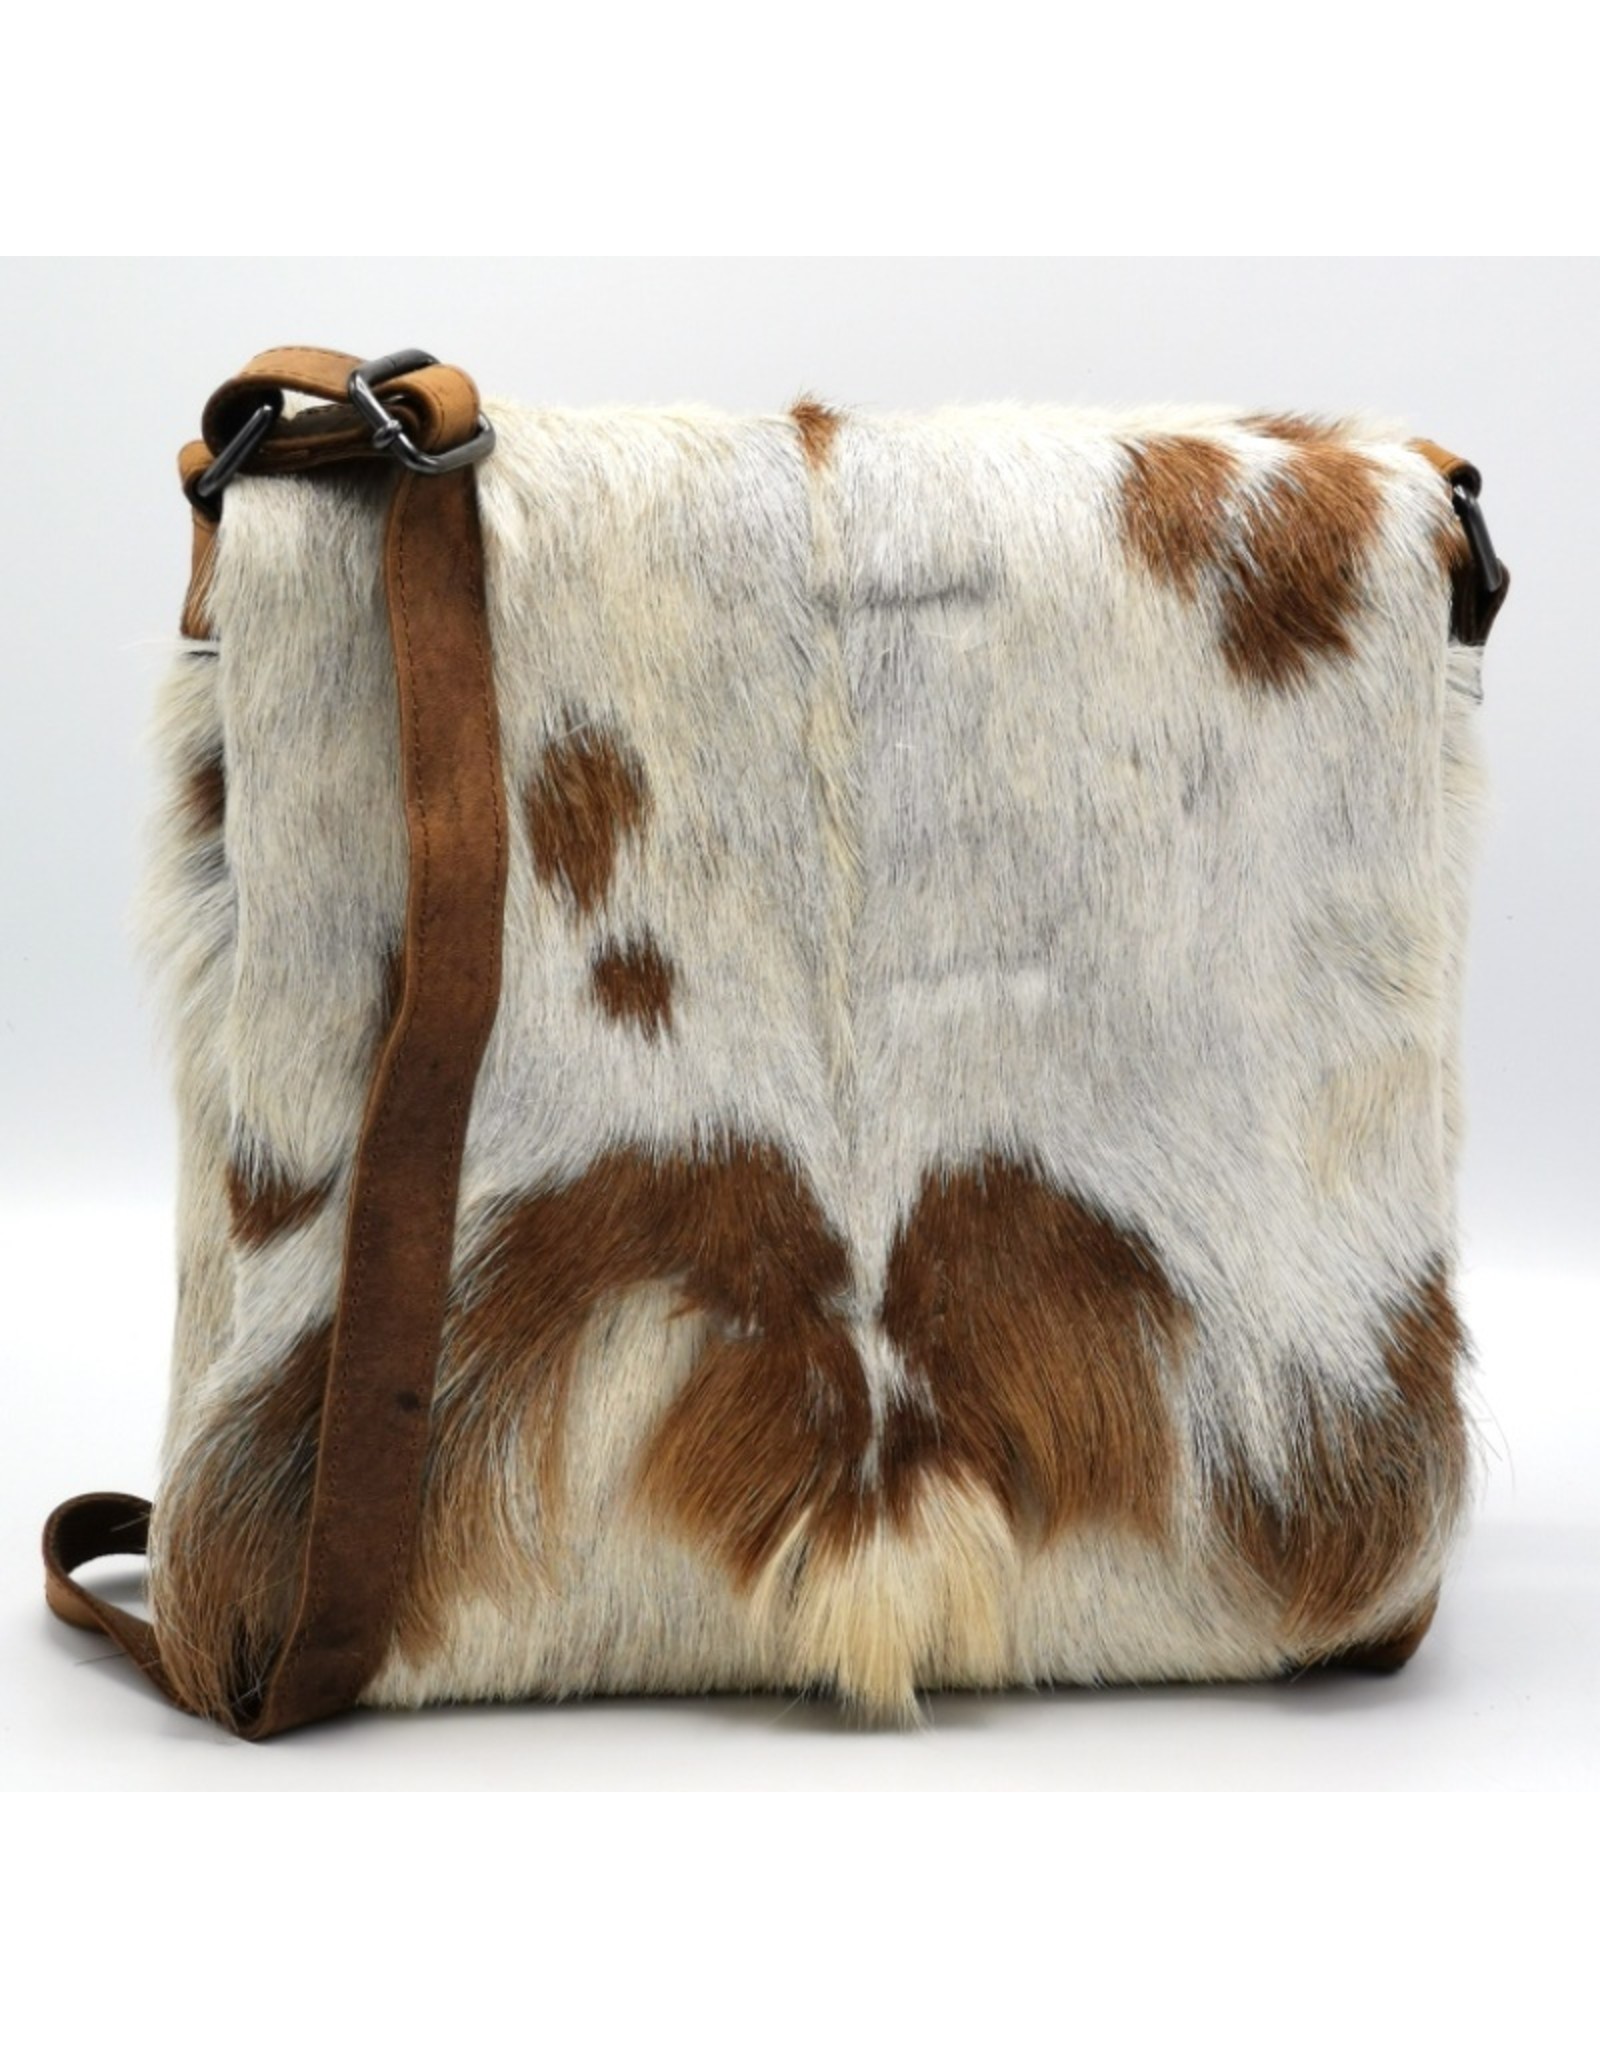 Hide & Stitches Leather bags - Hide & Stitches Leather Shoulder bag with Fur cover